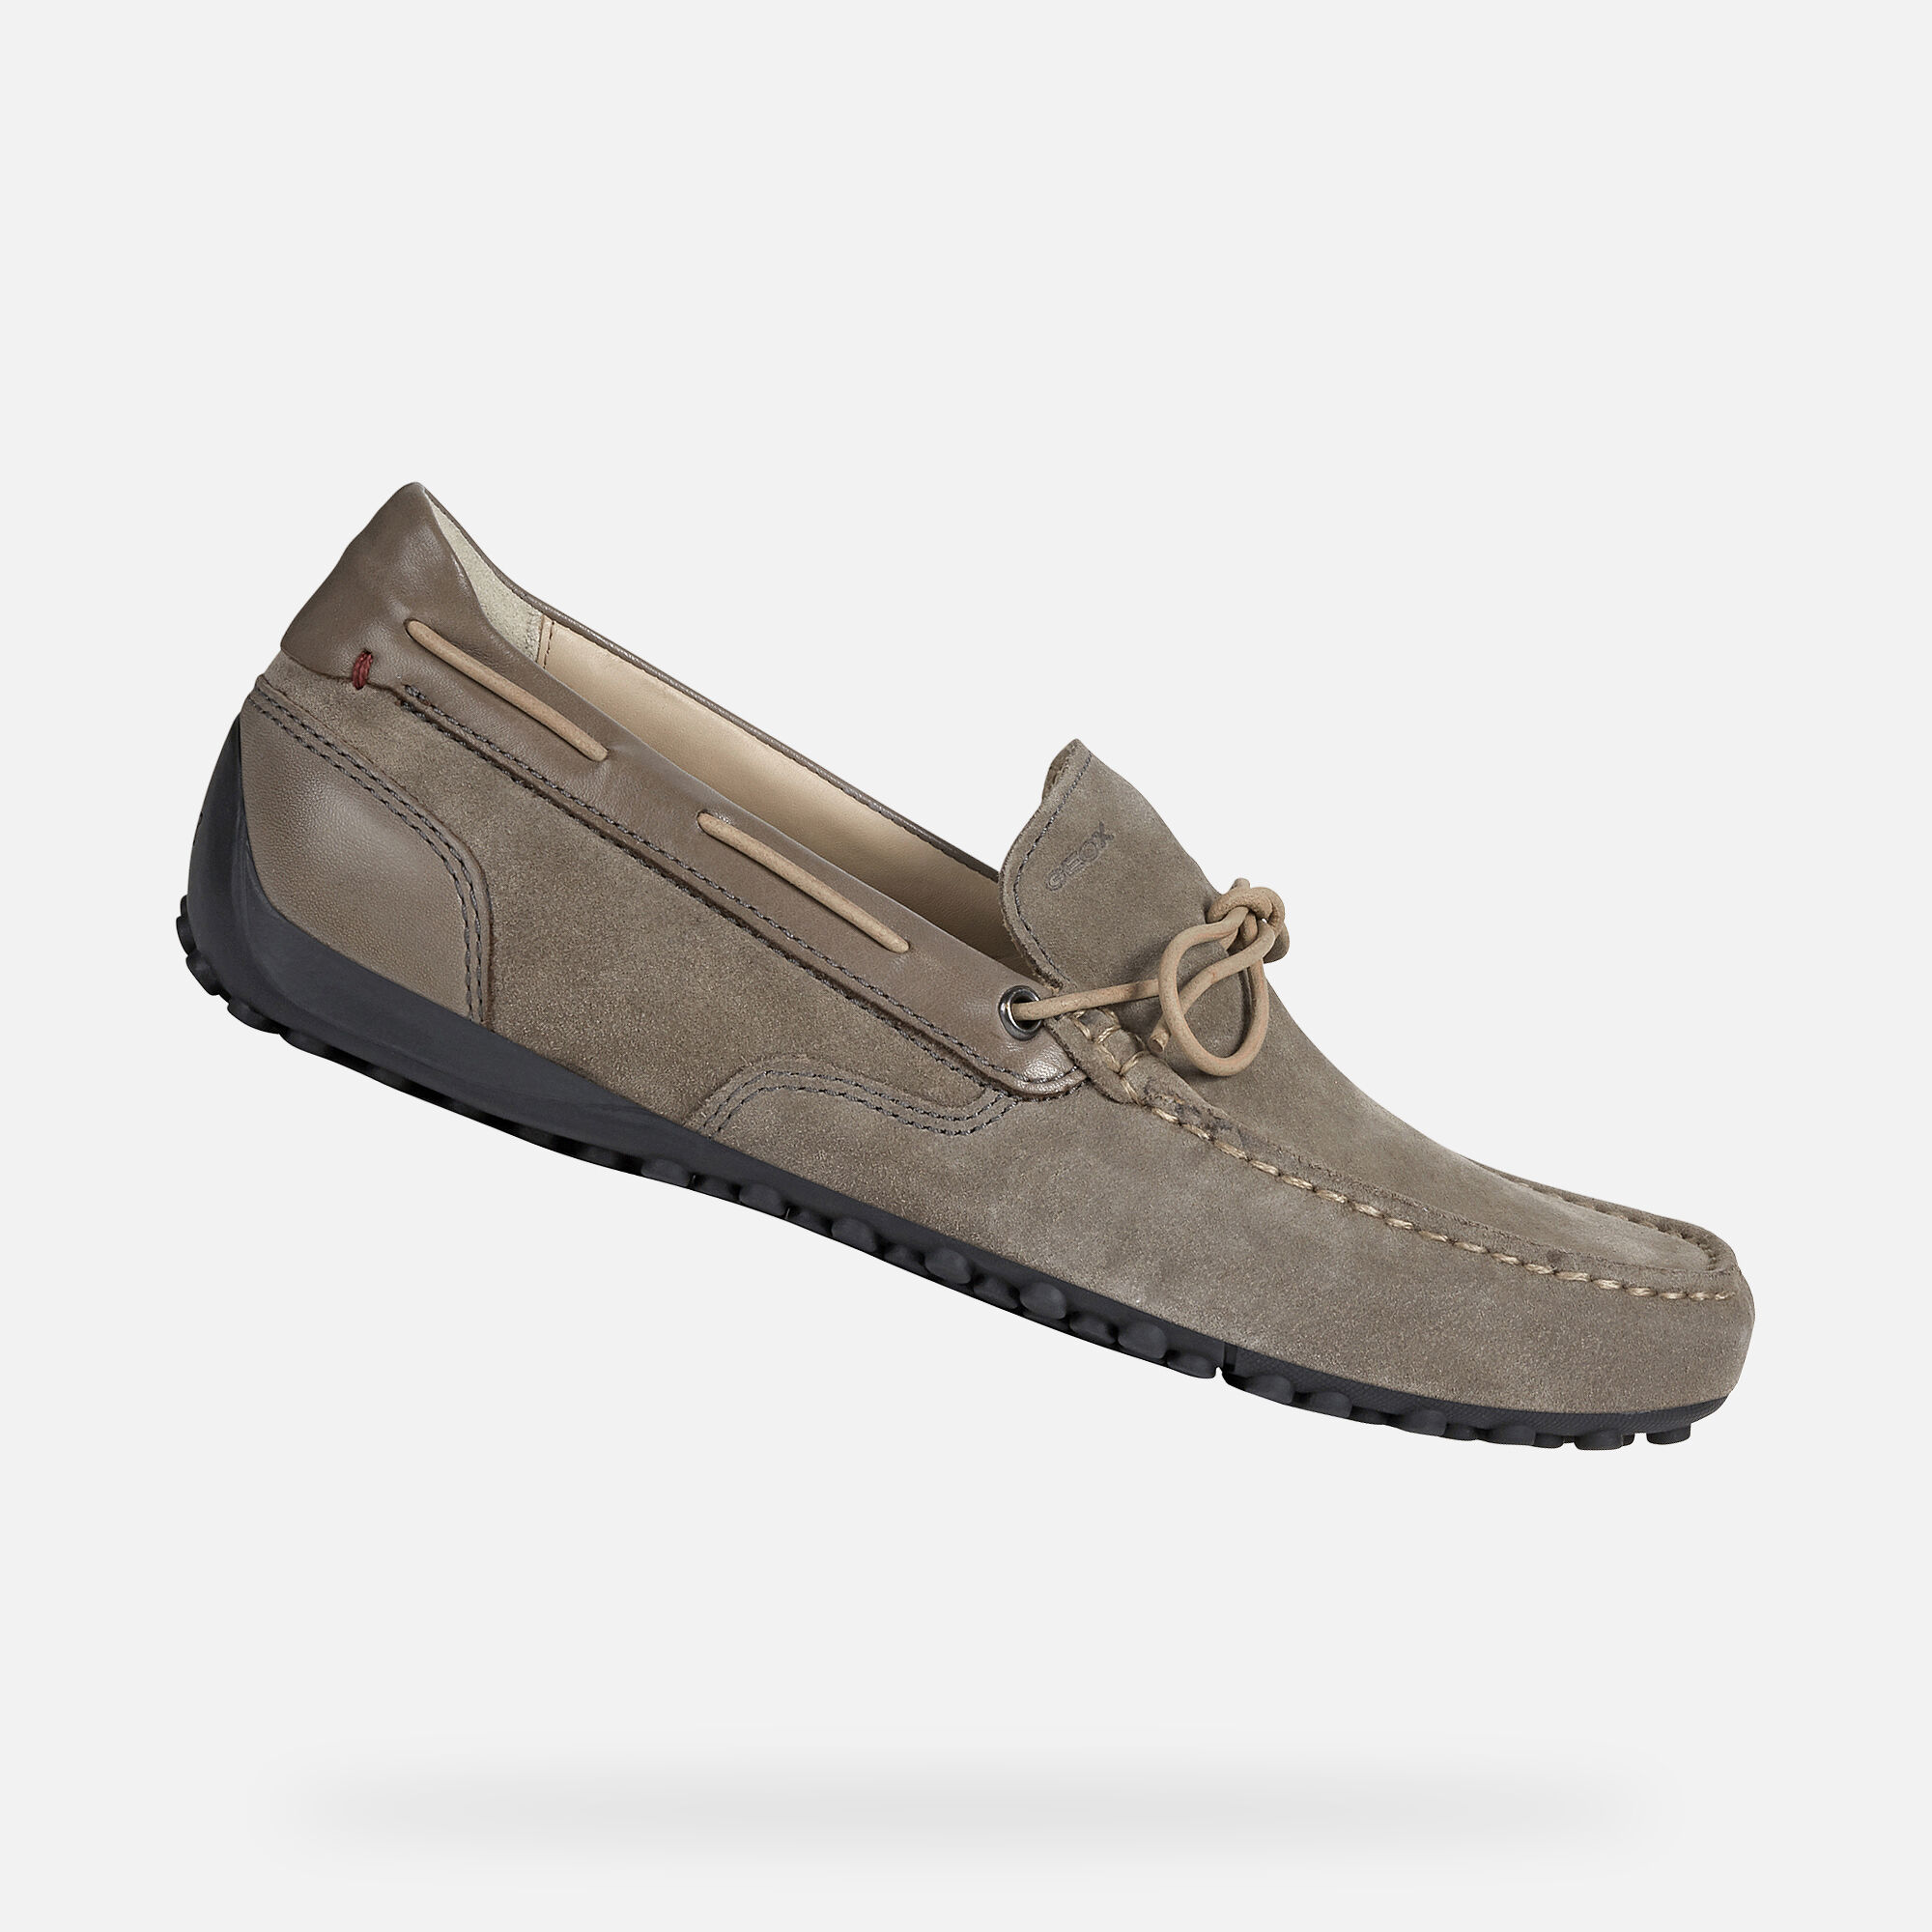 geox snake moccasin